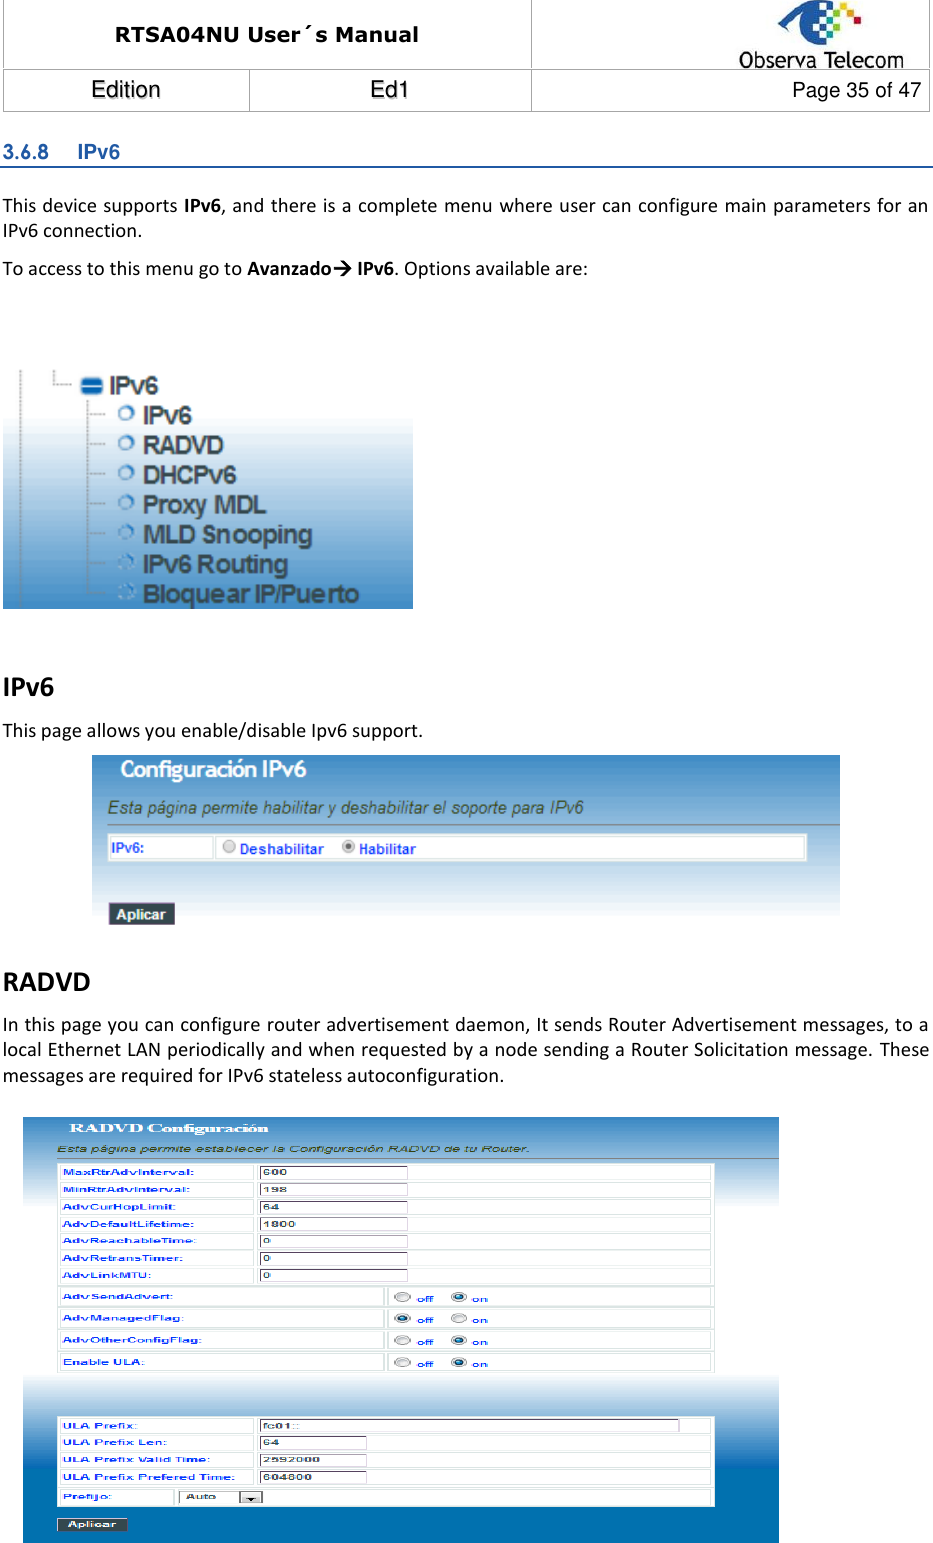 RTSA04NU User´s Manual  EEddiittiioonn  EEdd11  Page 35 of 47  3.6.8  IPv6 This device supports IPv6, and there is a complete menu where user can configure main parameters for an IPv6 connection. To access to this menu go to Avanzado IPv6. Options available are:     IPv6 This page allows you enable/disable Ipv6 support.  RADVD In this page you can configure router advertisement daemon, It sends Router Advertisement messages, to a local Ethernet LAN periodically and when requested by a node sending a Router Solicitation message.  These messages are required for IPv6 stateless autoconfiguration.            